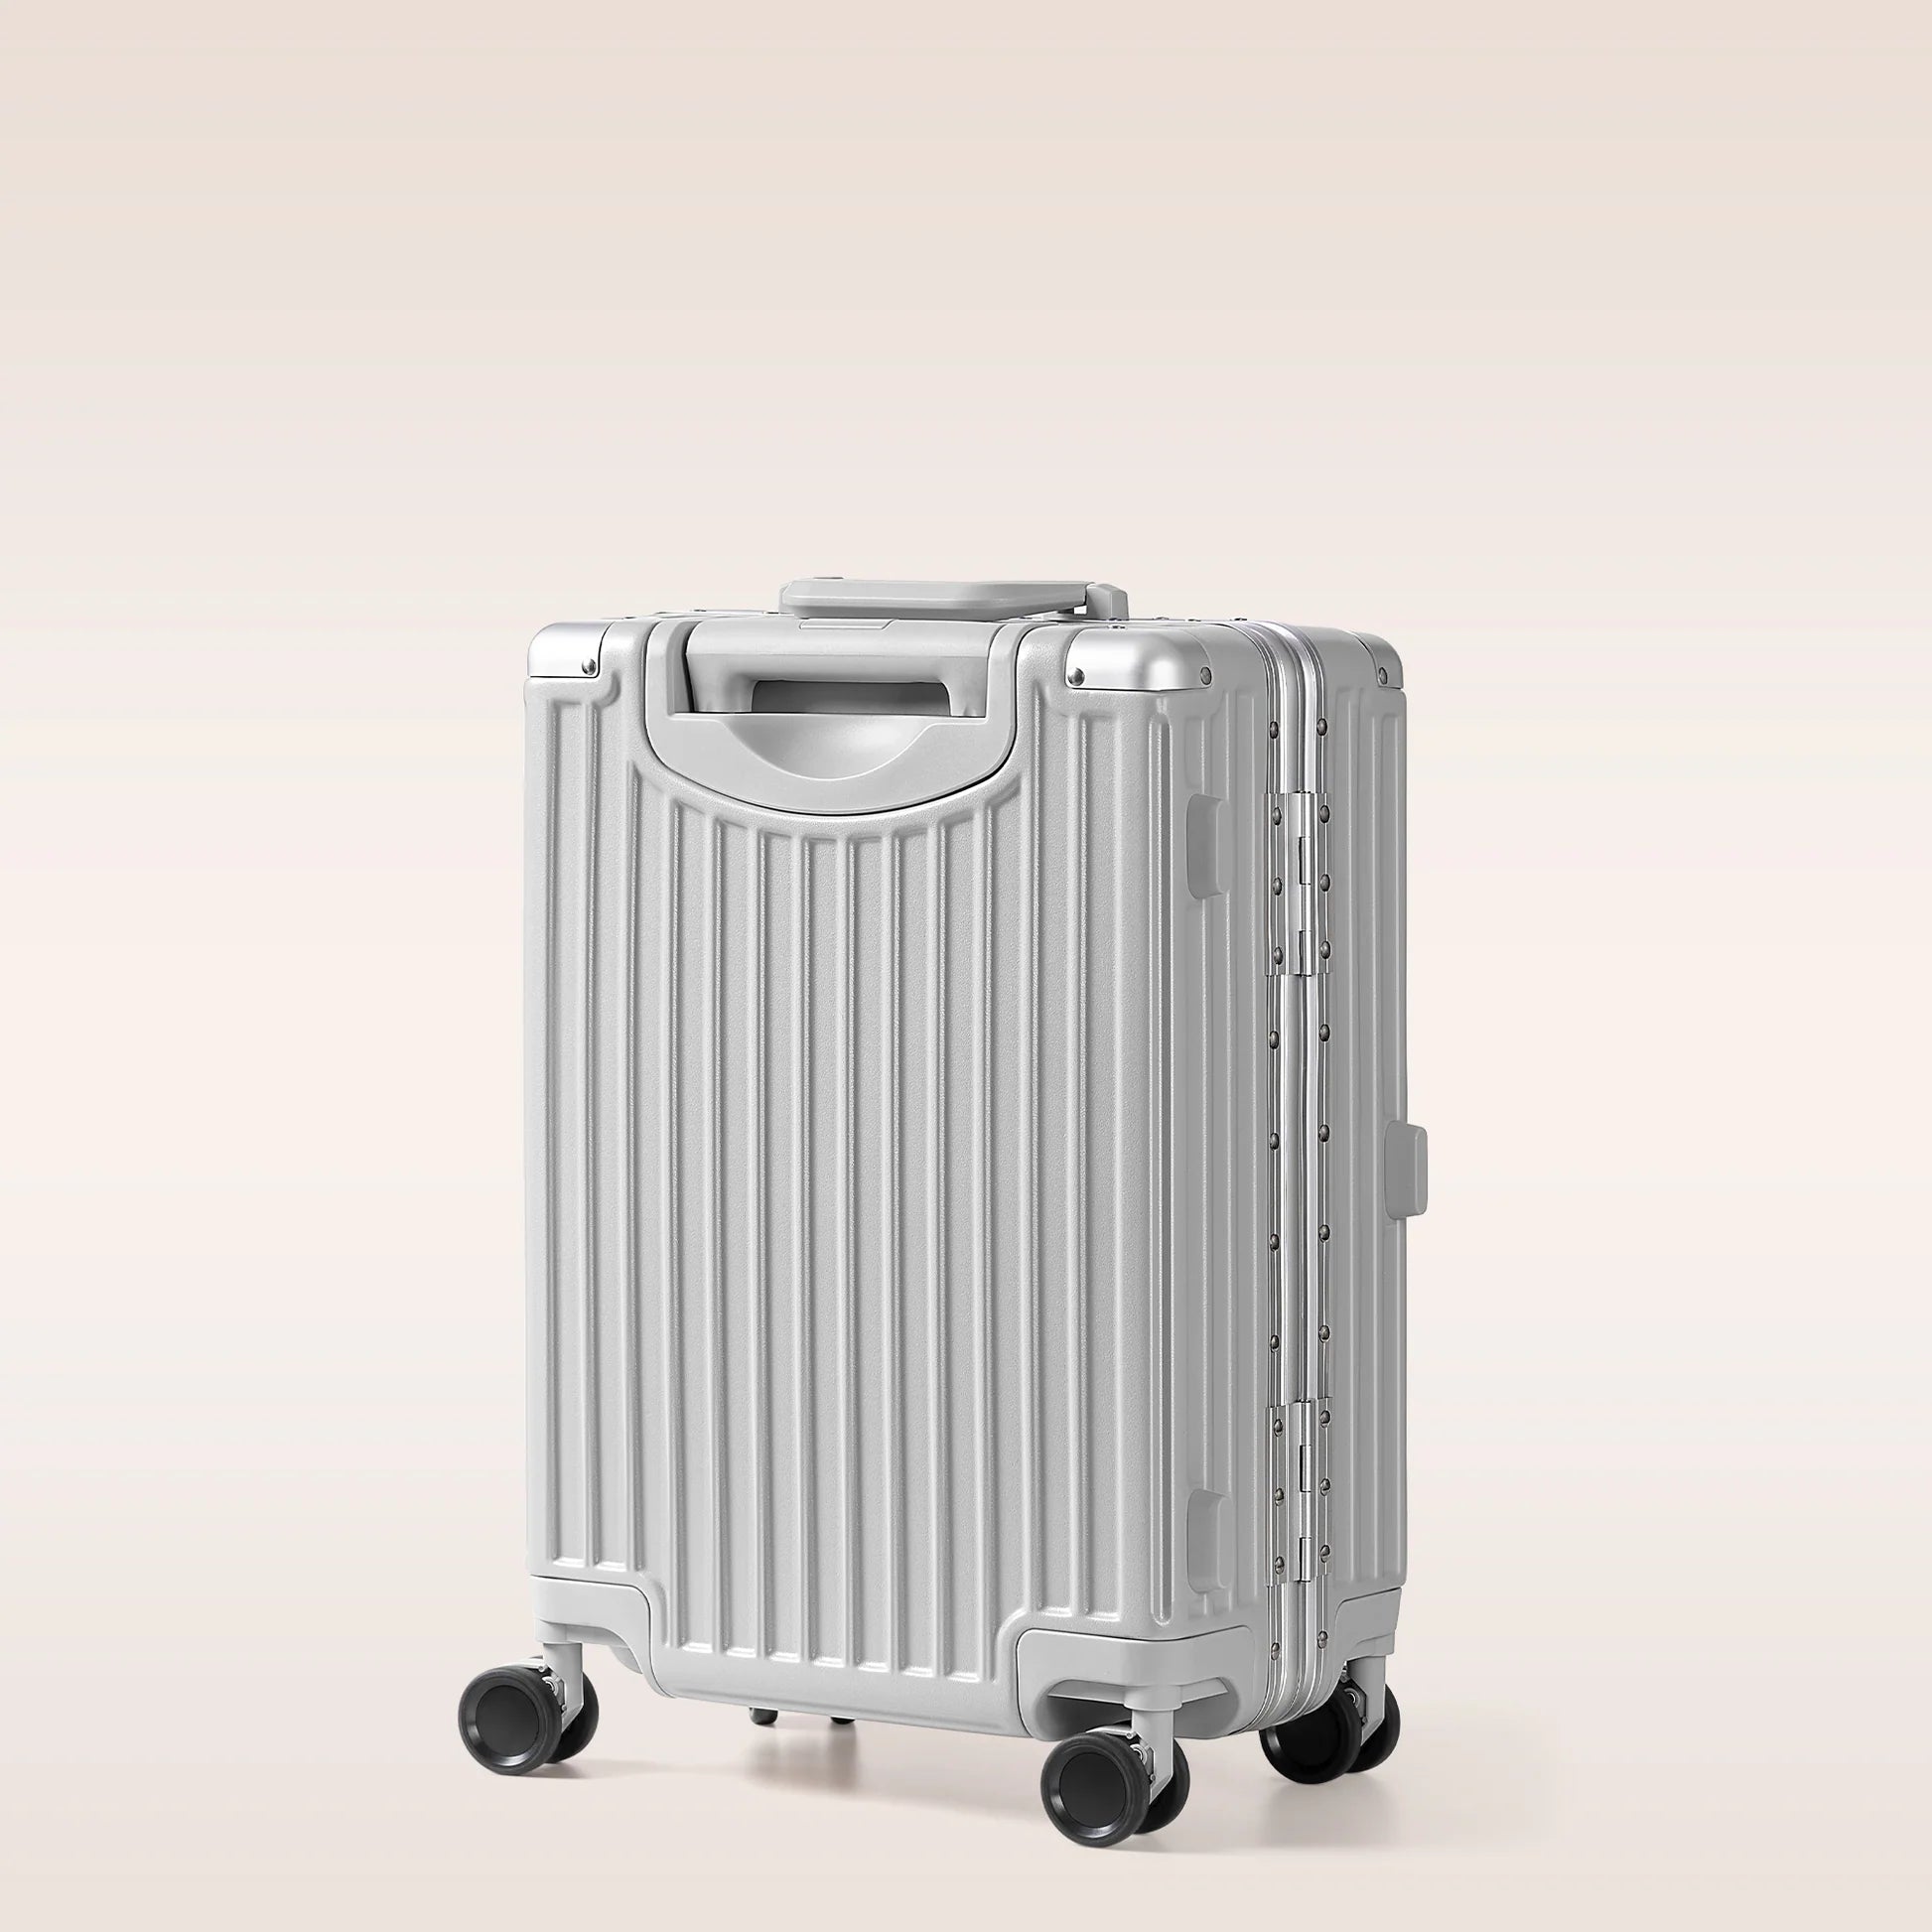 The Carry On Luggage: Aluminum Edition